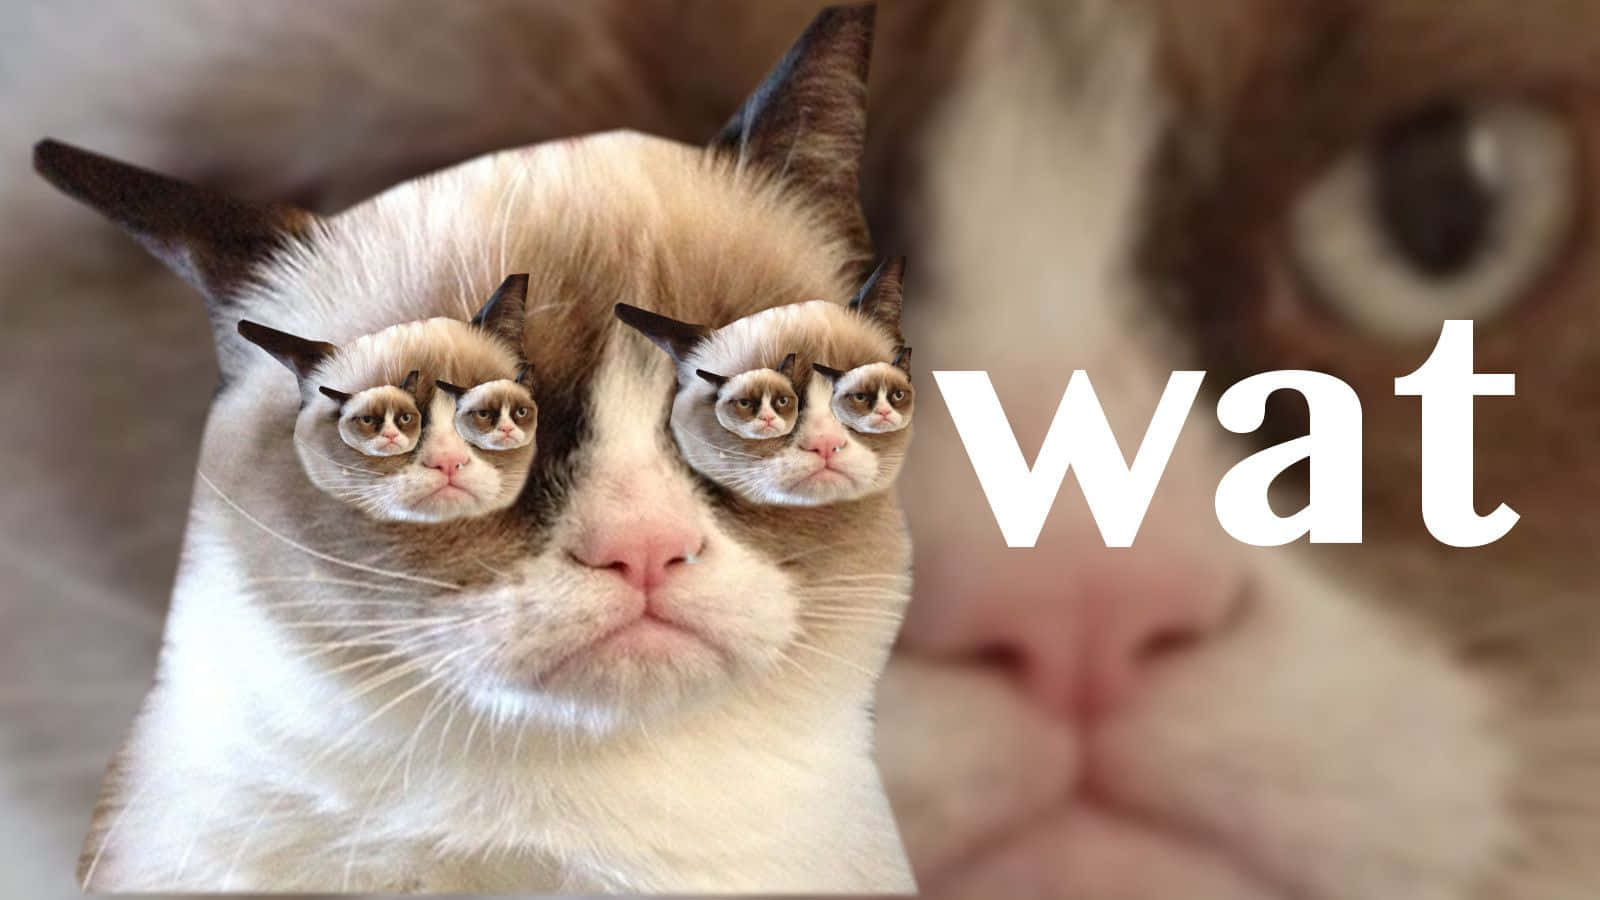 Brighten Up Your Day With A Cute Animal Meme Wallpaper